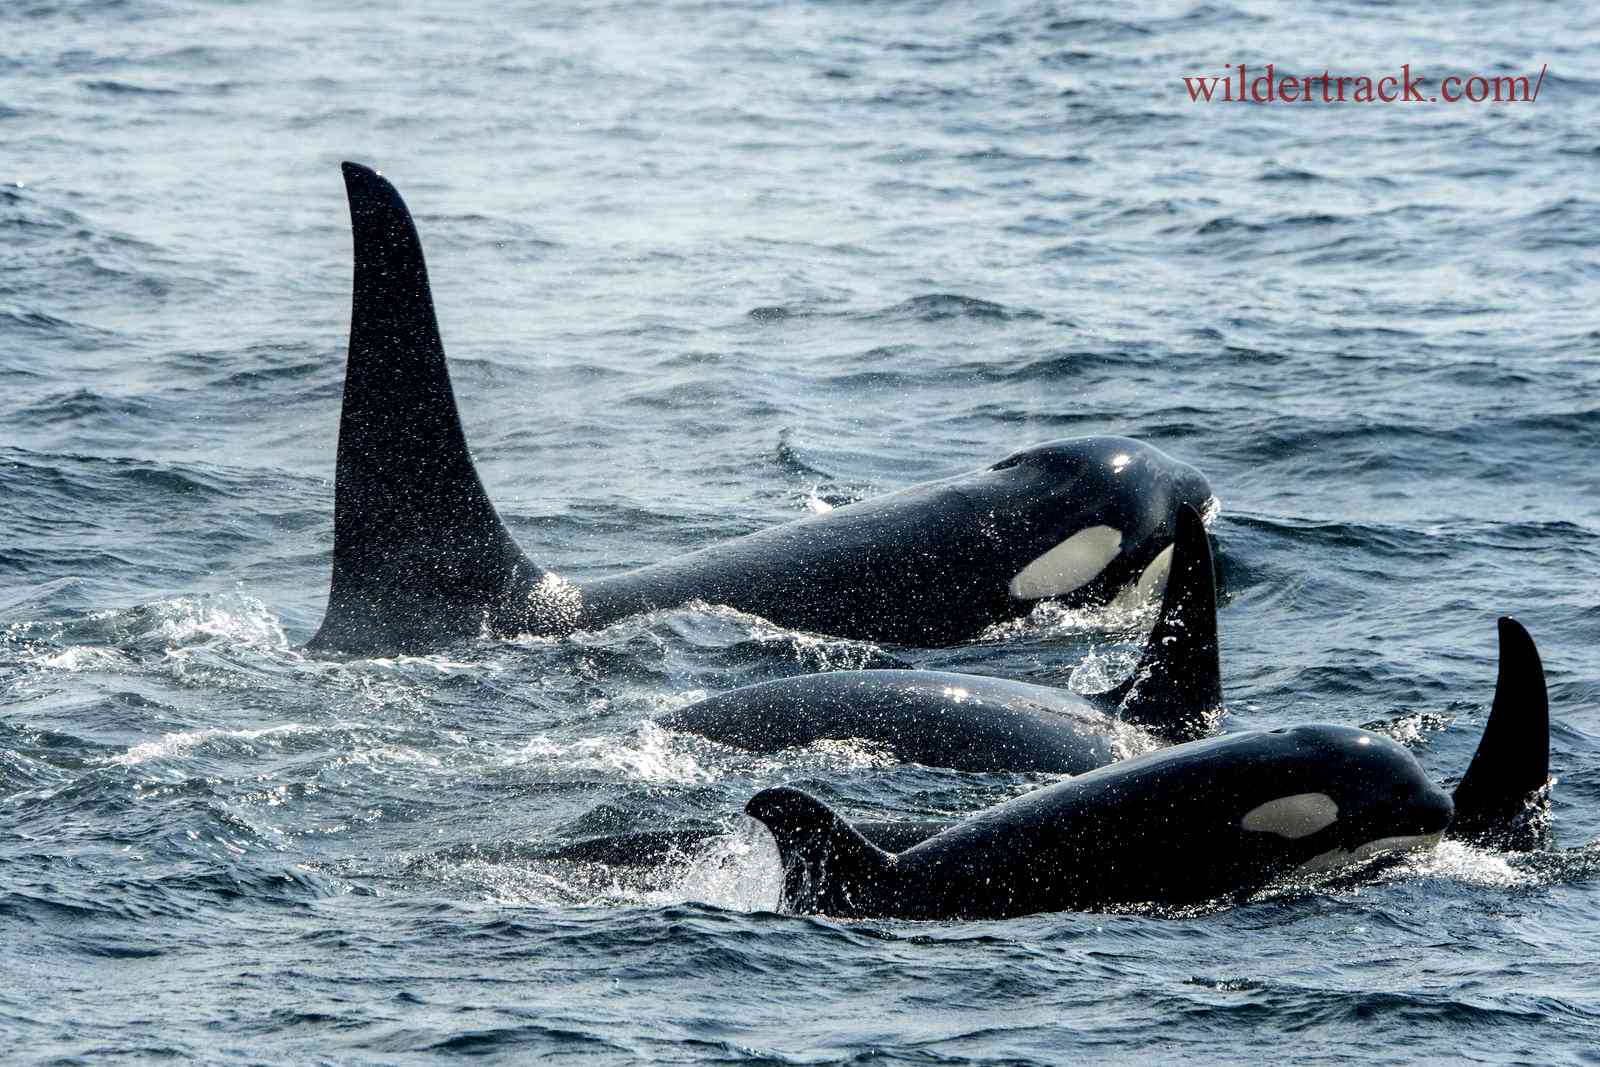 What Do Killer Whales Eat?